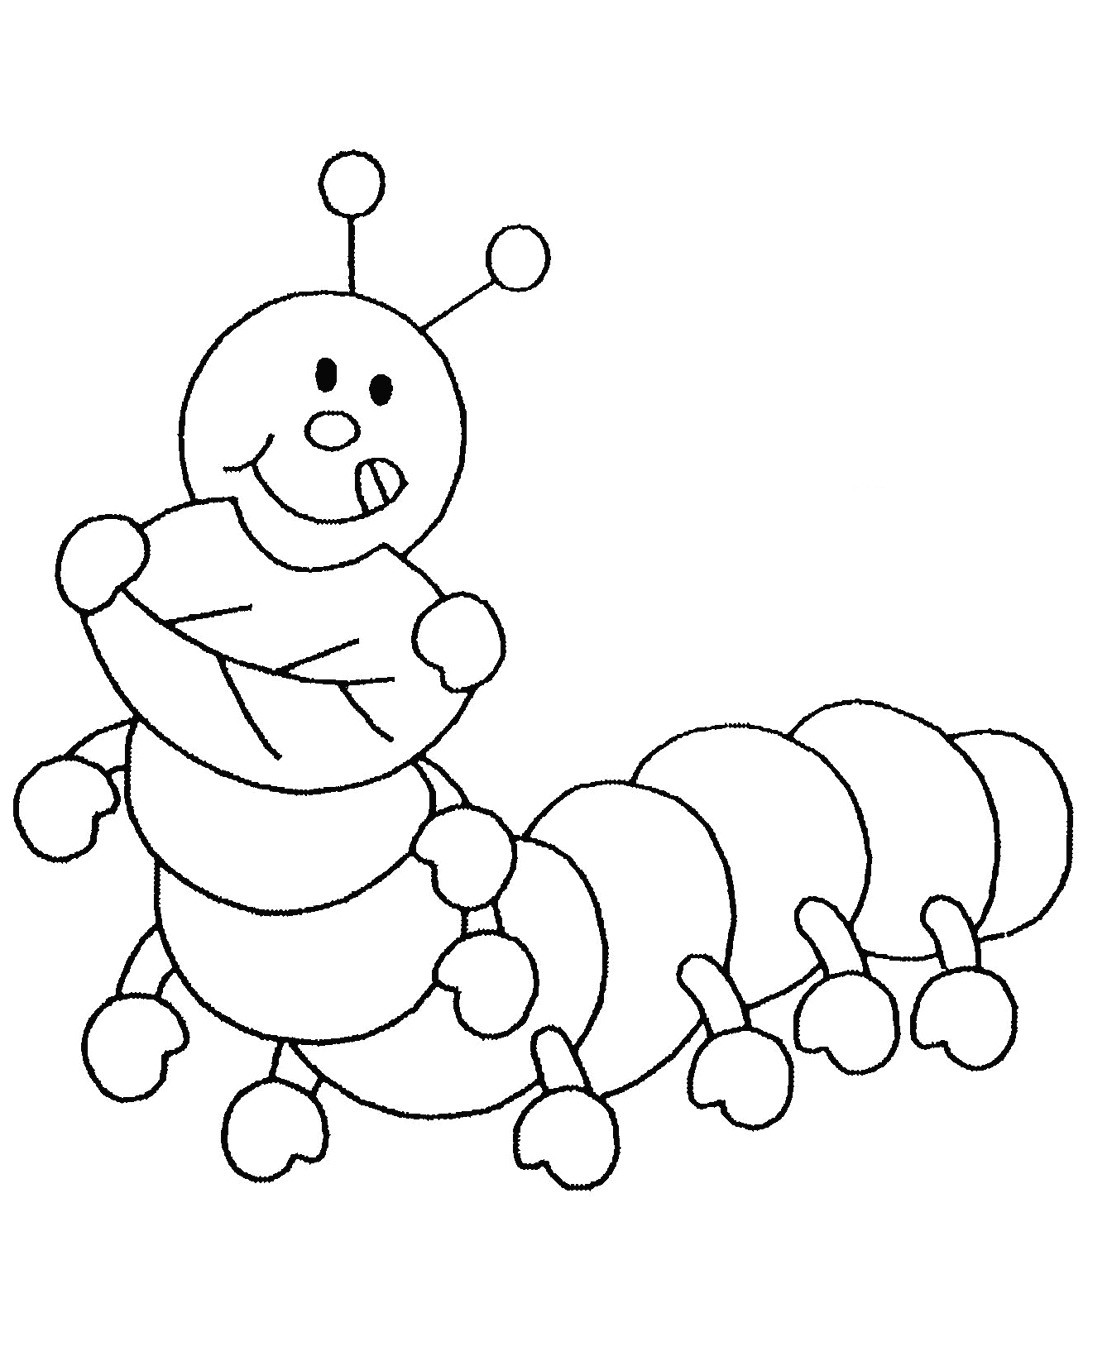 Bug Coloring Pages For Kids
 Caterpillar Insects Coloring pages for kids to print & color